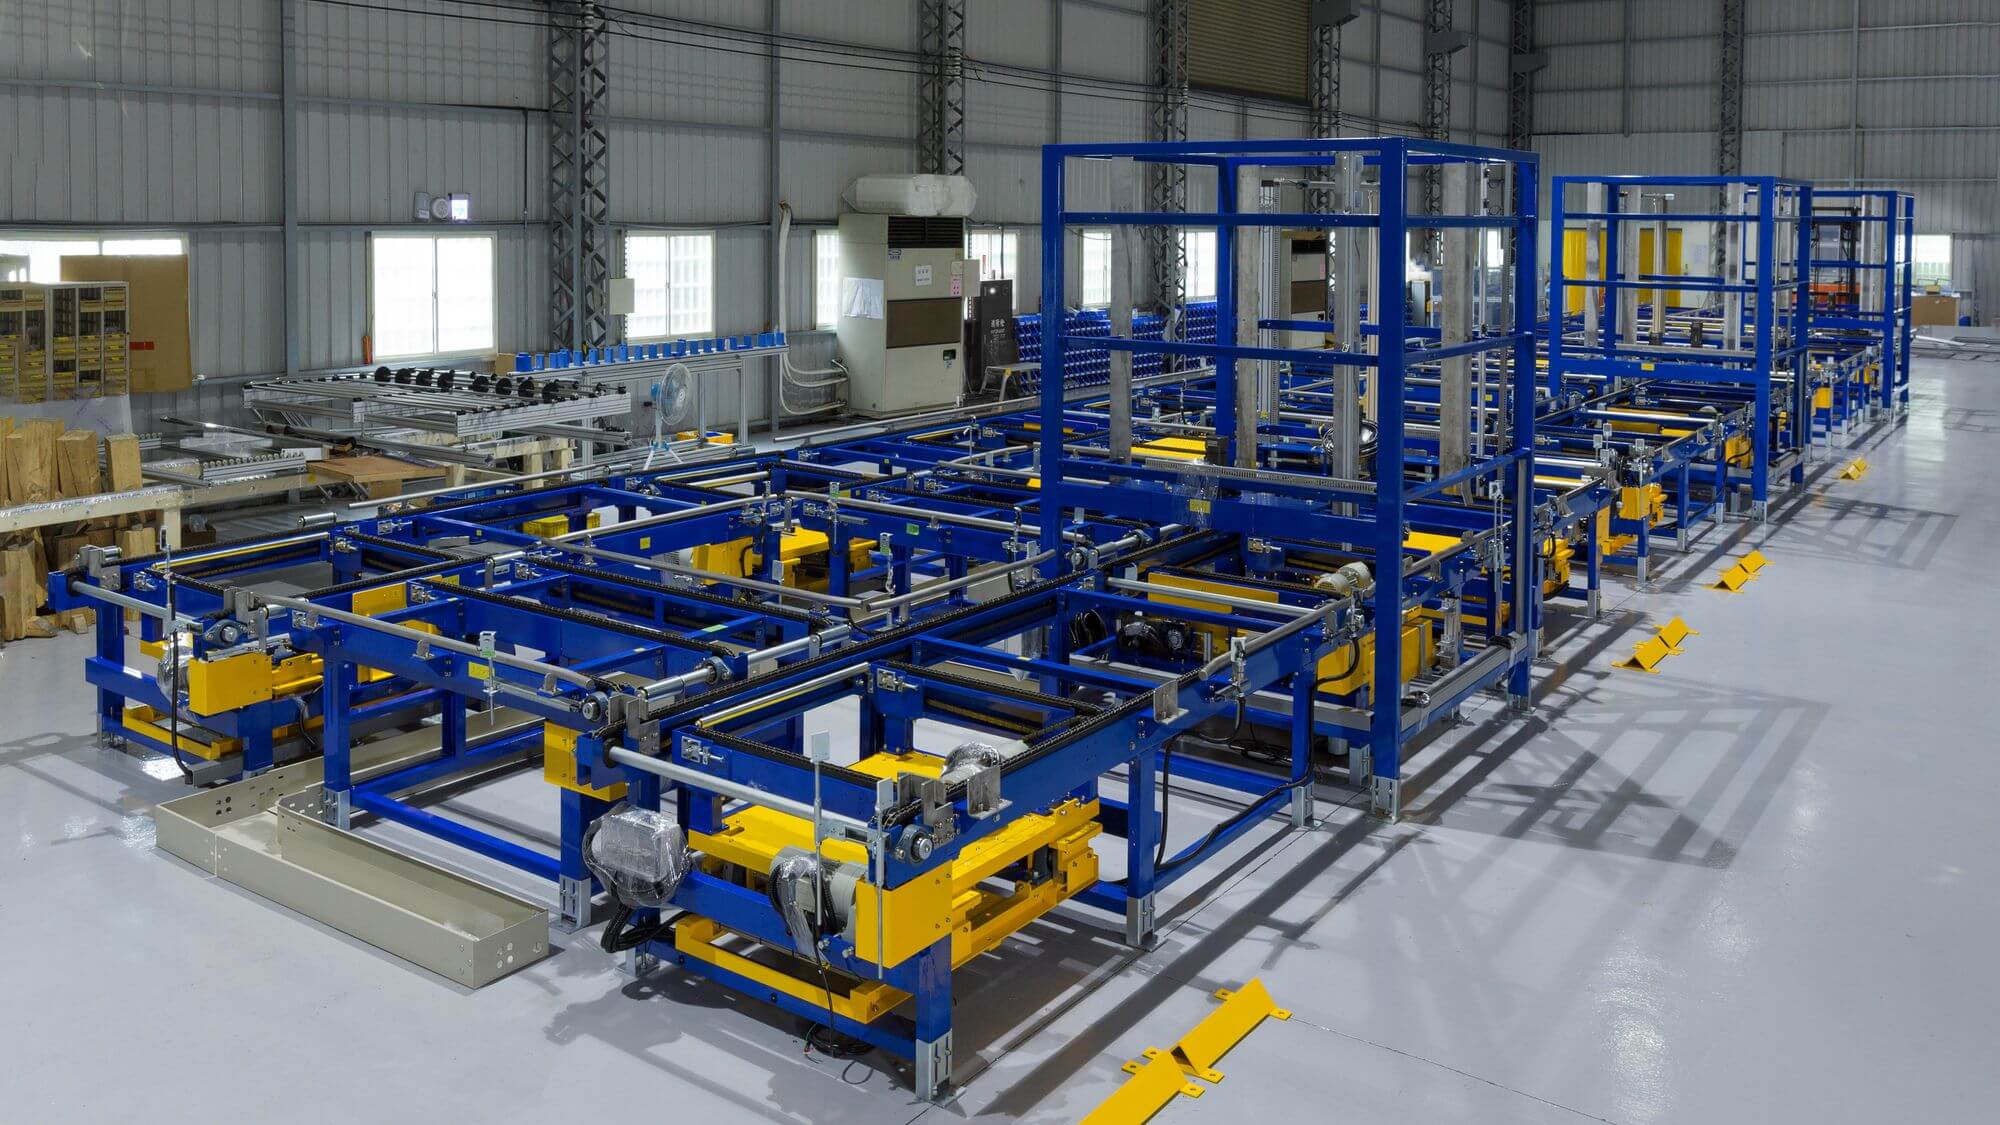 Storage and Retrieval System for Pallets